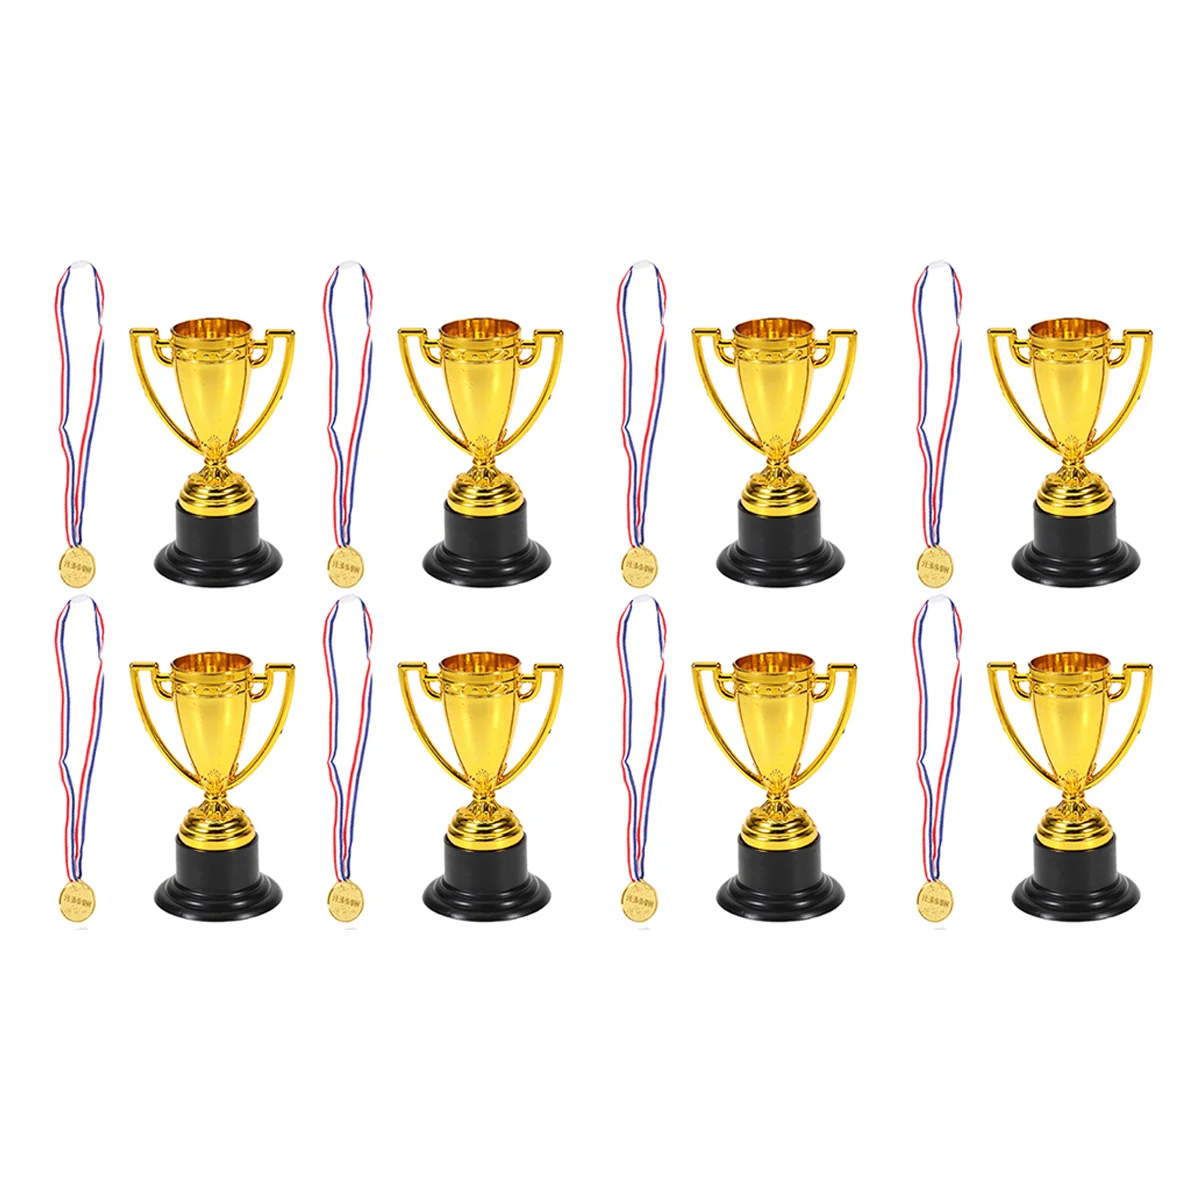 

Trophy Medals Kids Trophies Awards Gold Medal Mini Award Winner Prizes Soccer Plastic Reward Cup Cups Gift Party Sports Favor